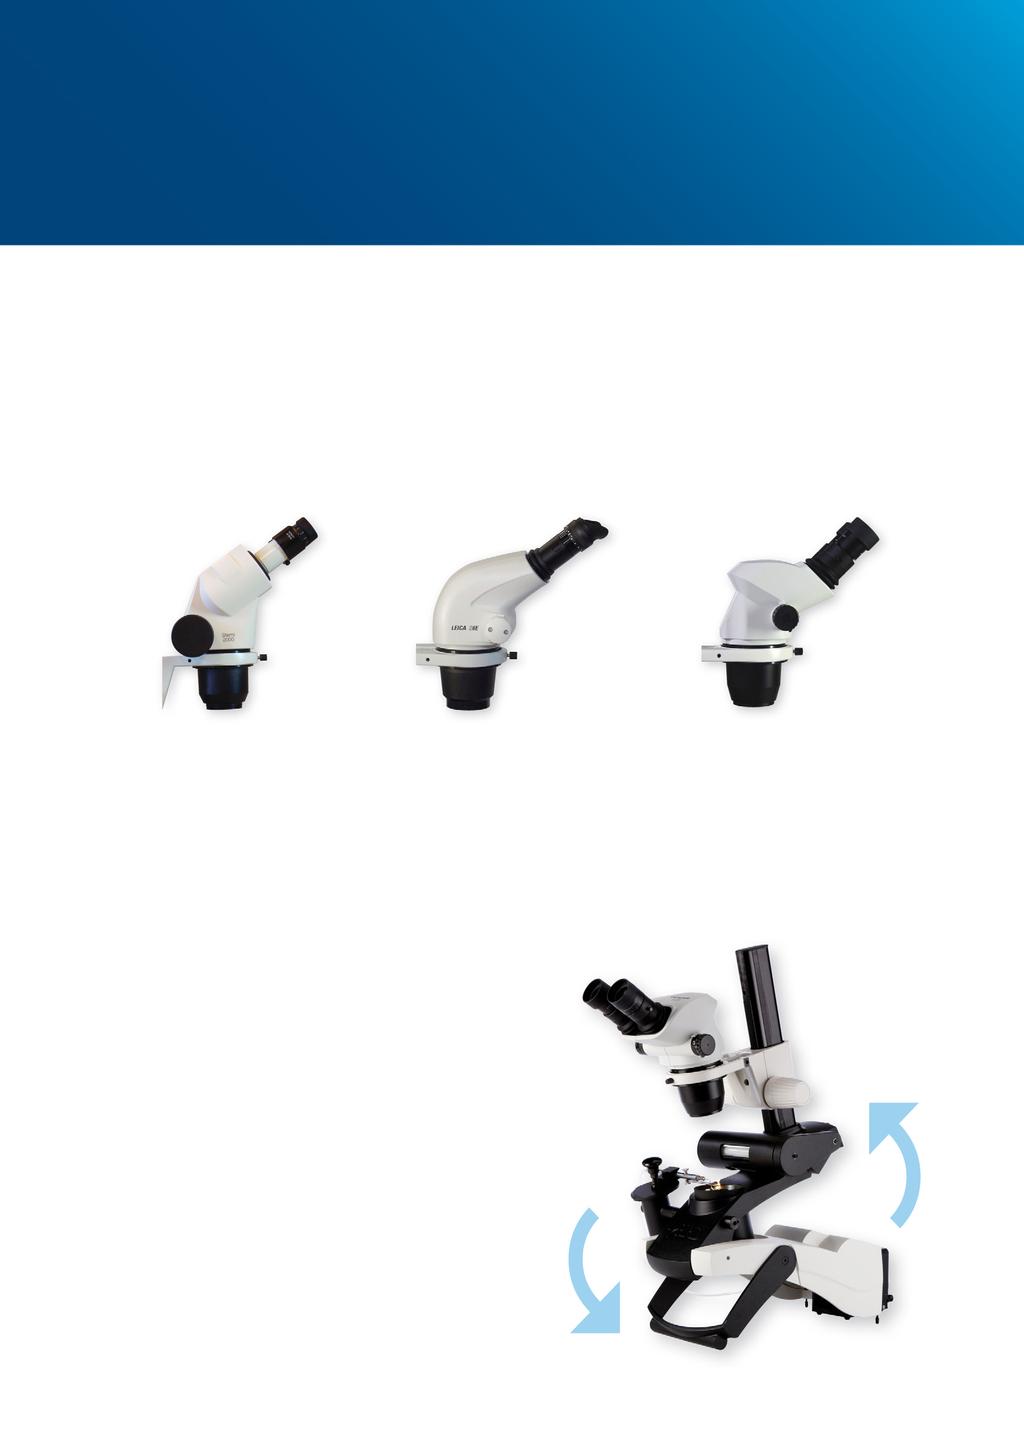 Optics Stereo zoom microscopes provide the ability to see fine details in 3D. The optical excellence allows a better, faster and more reliable identification, analysis and measurement.